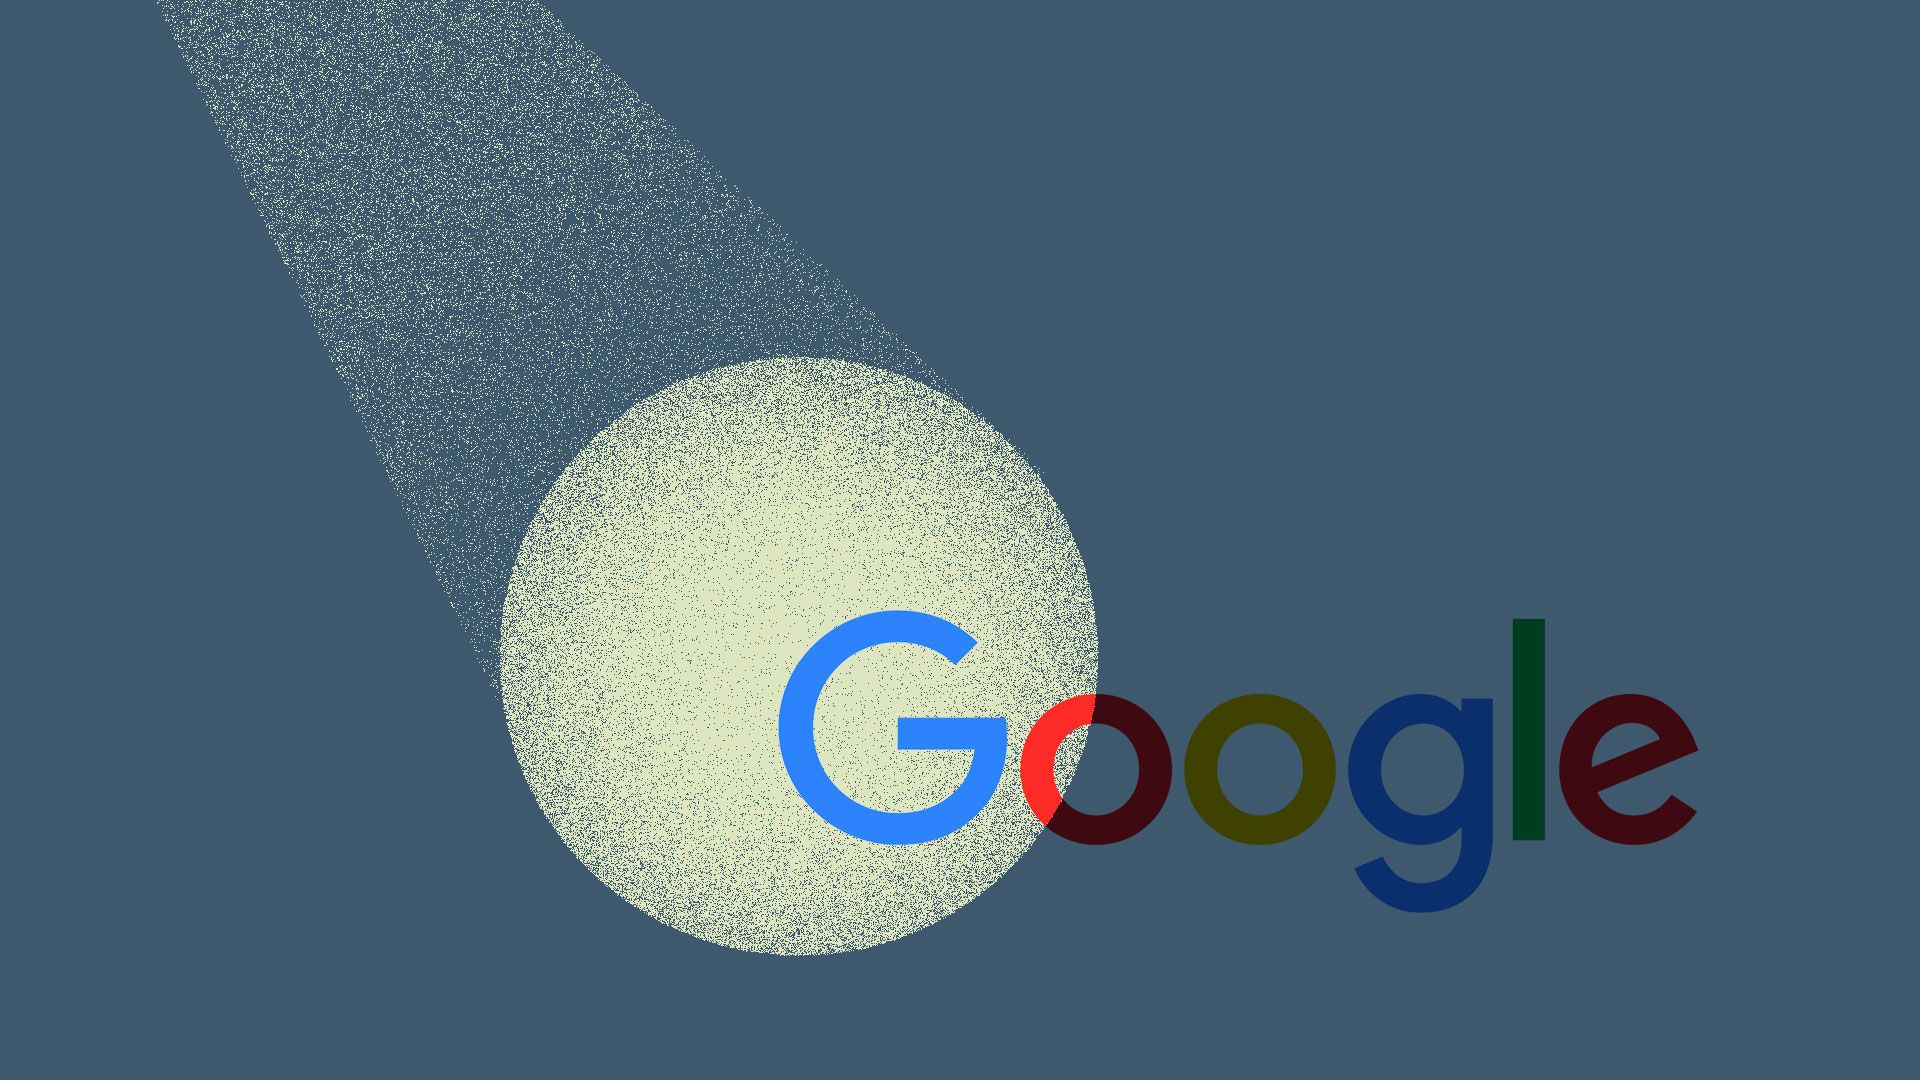 An image of the Google logo, quite literally, under a spotlight